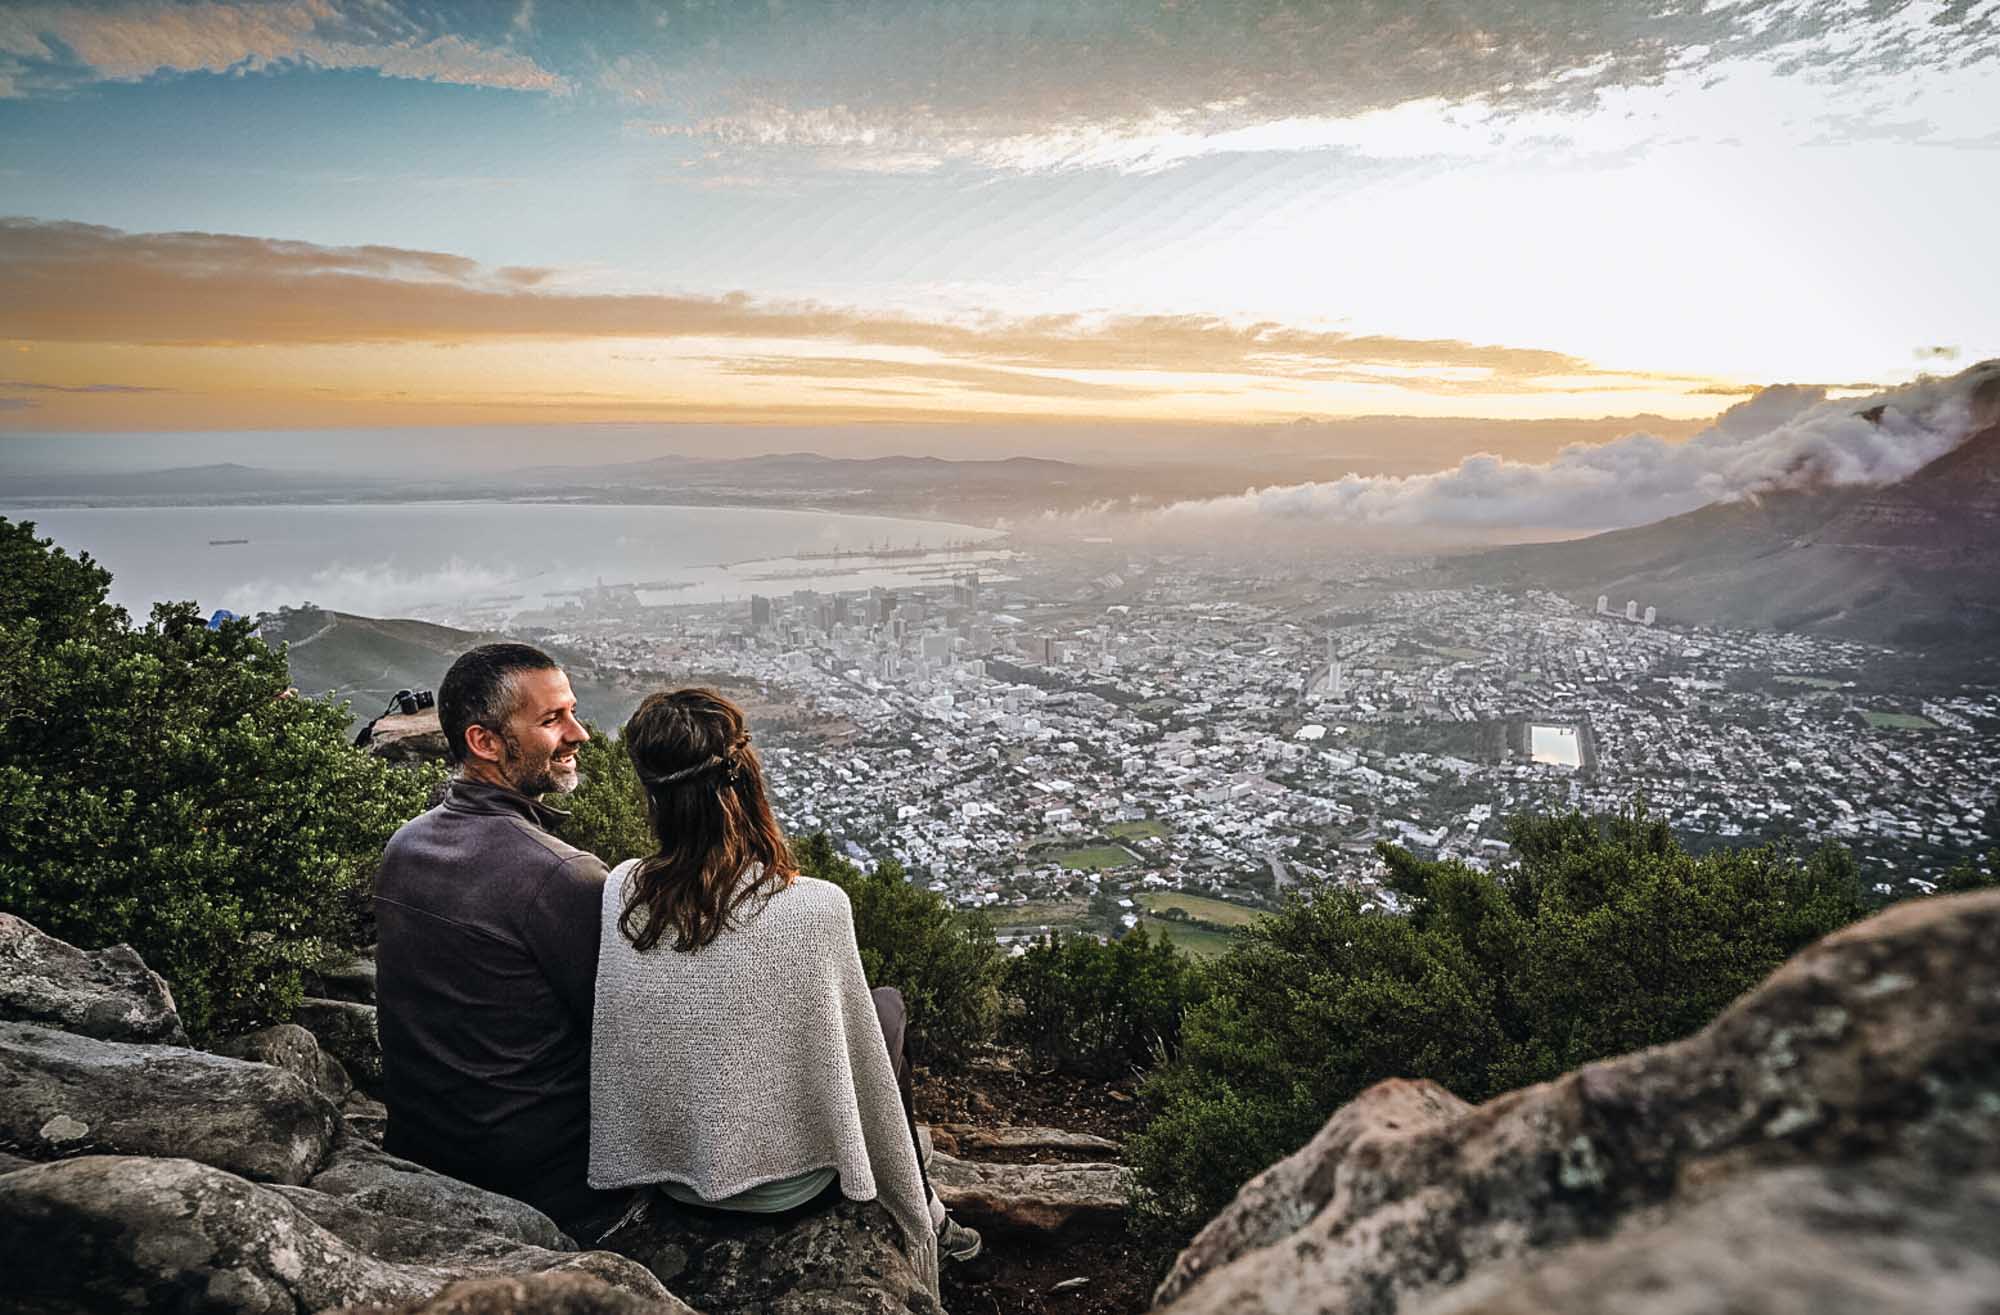 Overlooking Cape Town, South Africa